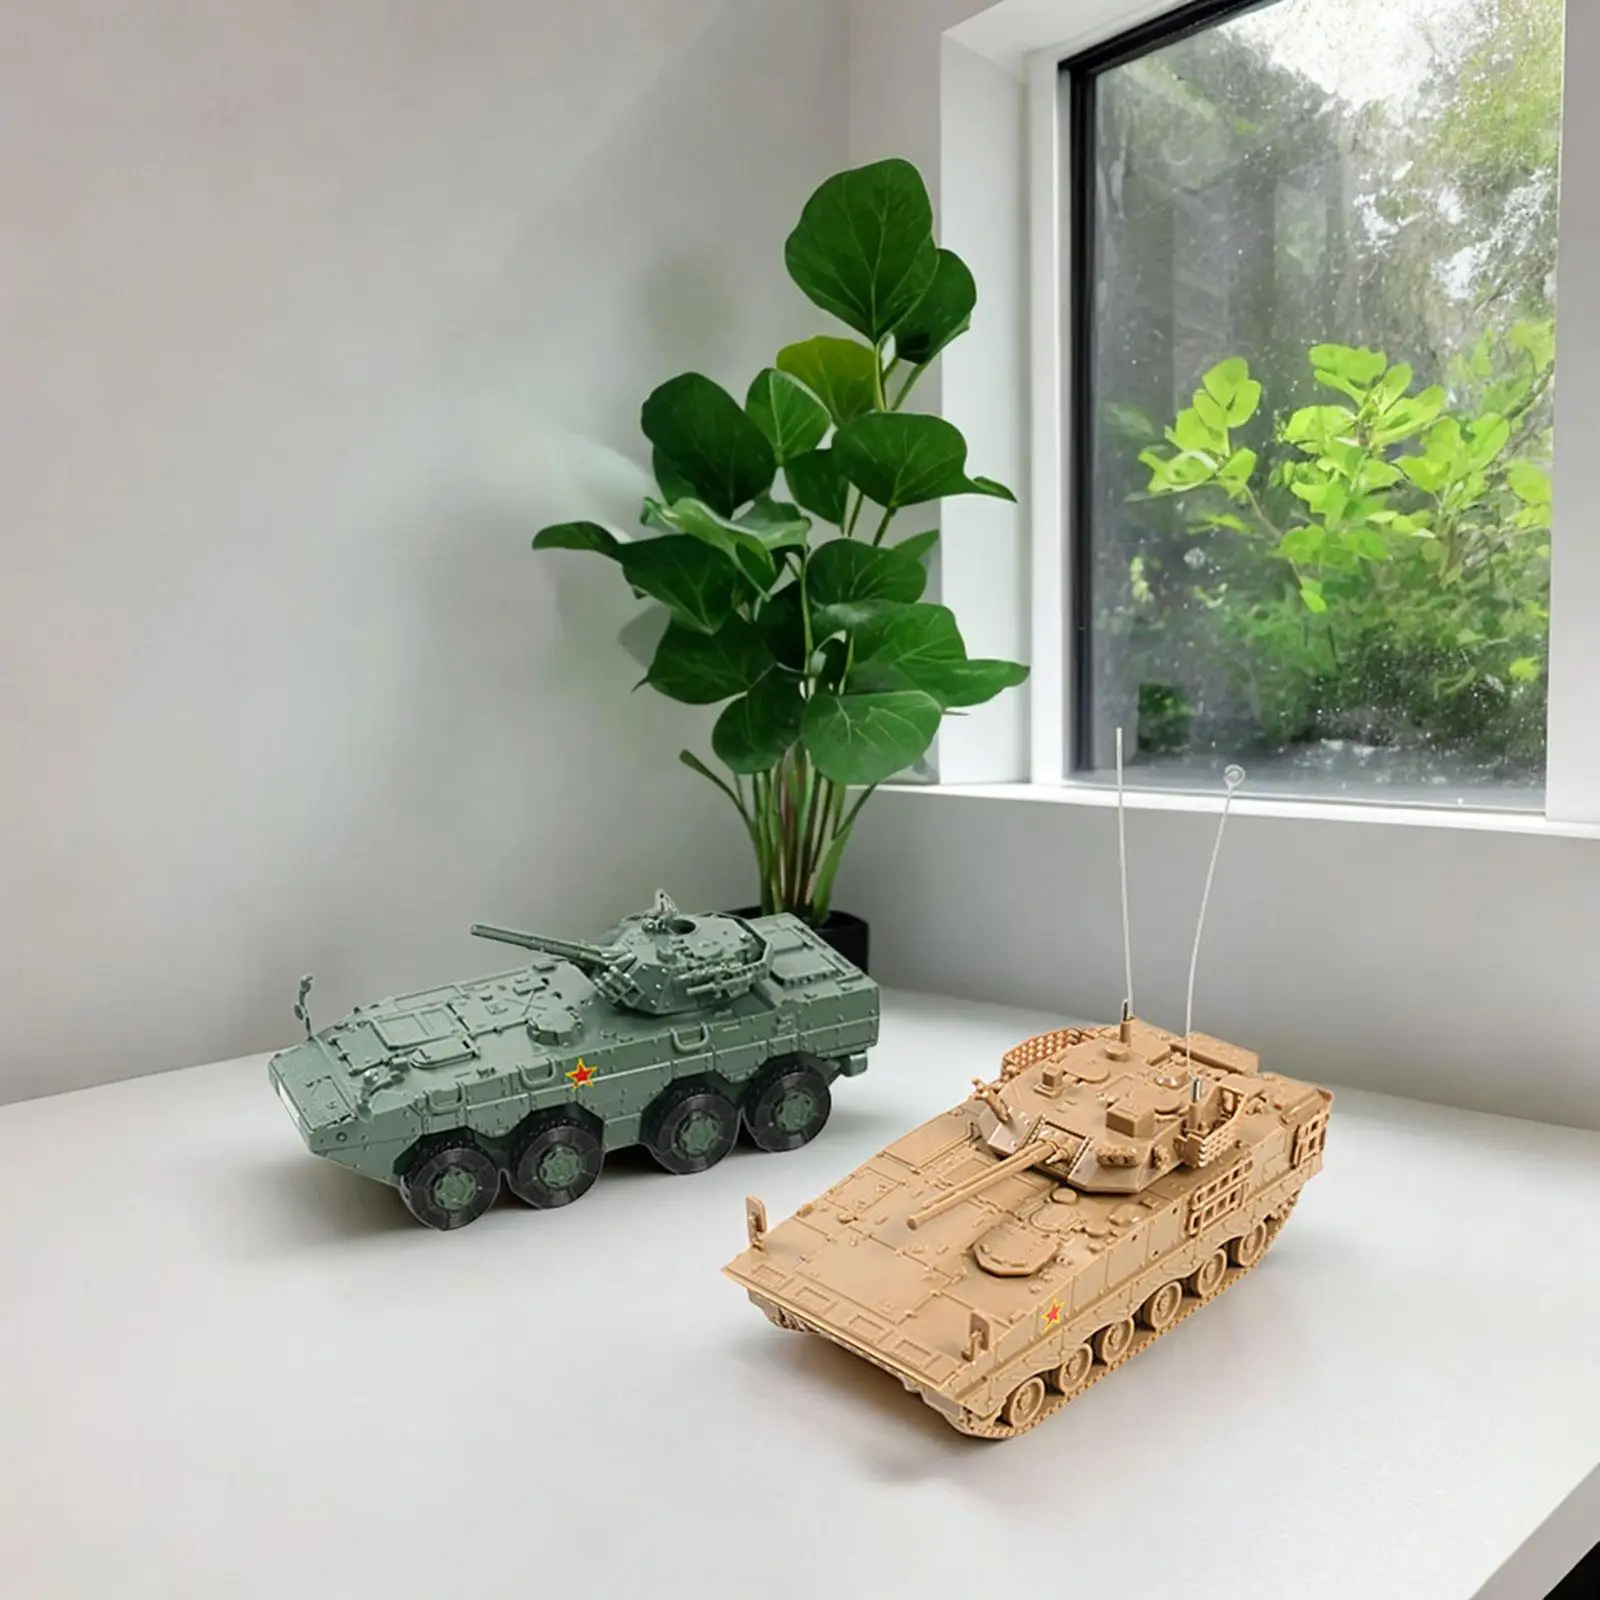 2x 1:72 Scale DIY Tank Model Education Toy Miniature Tank Model Tabletop Decor for Children Friends Adults Holiday Gifts